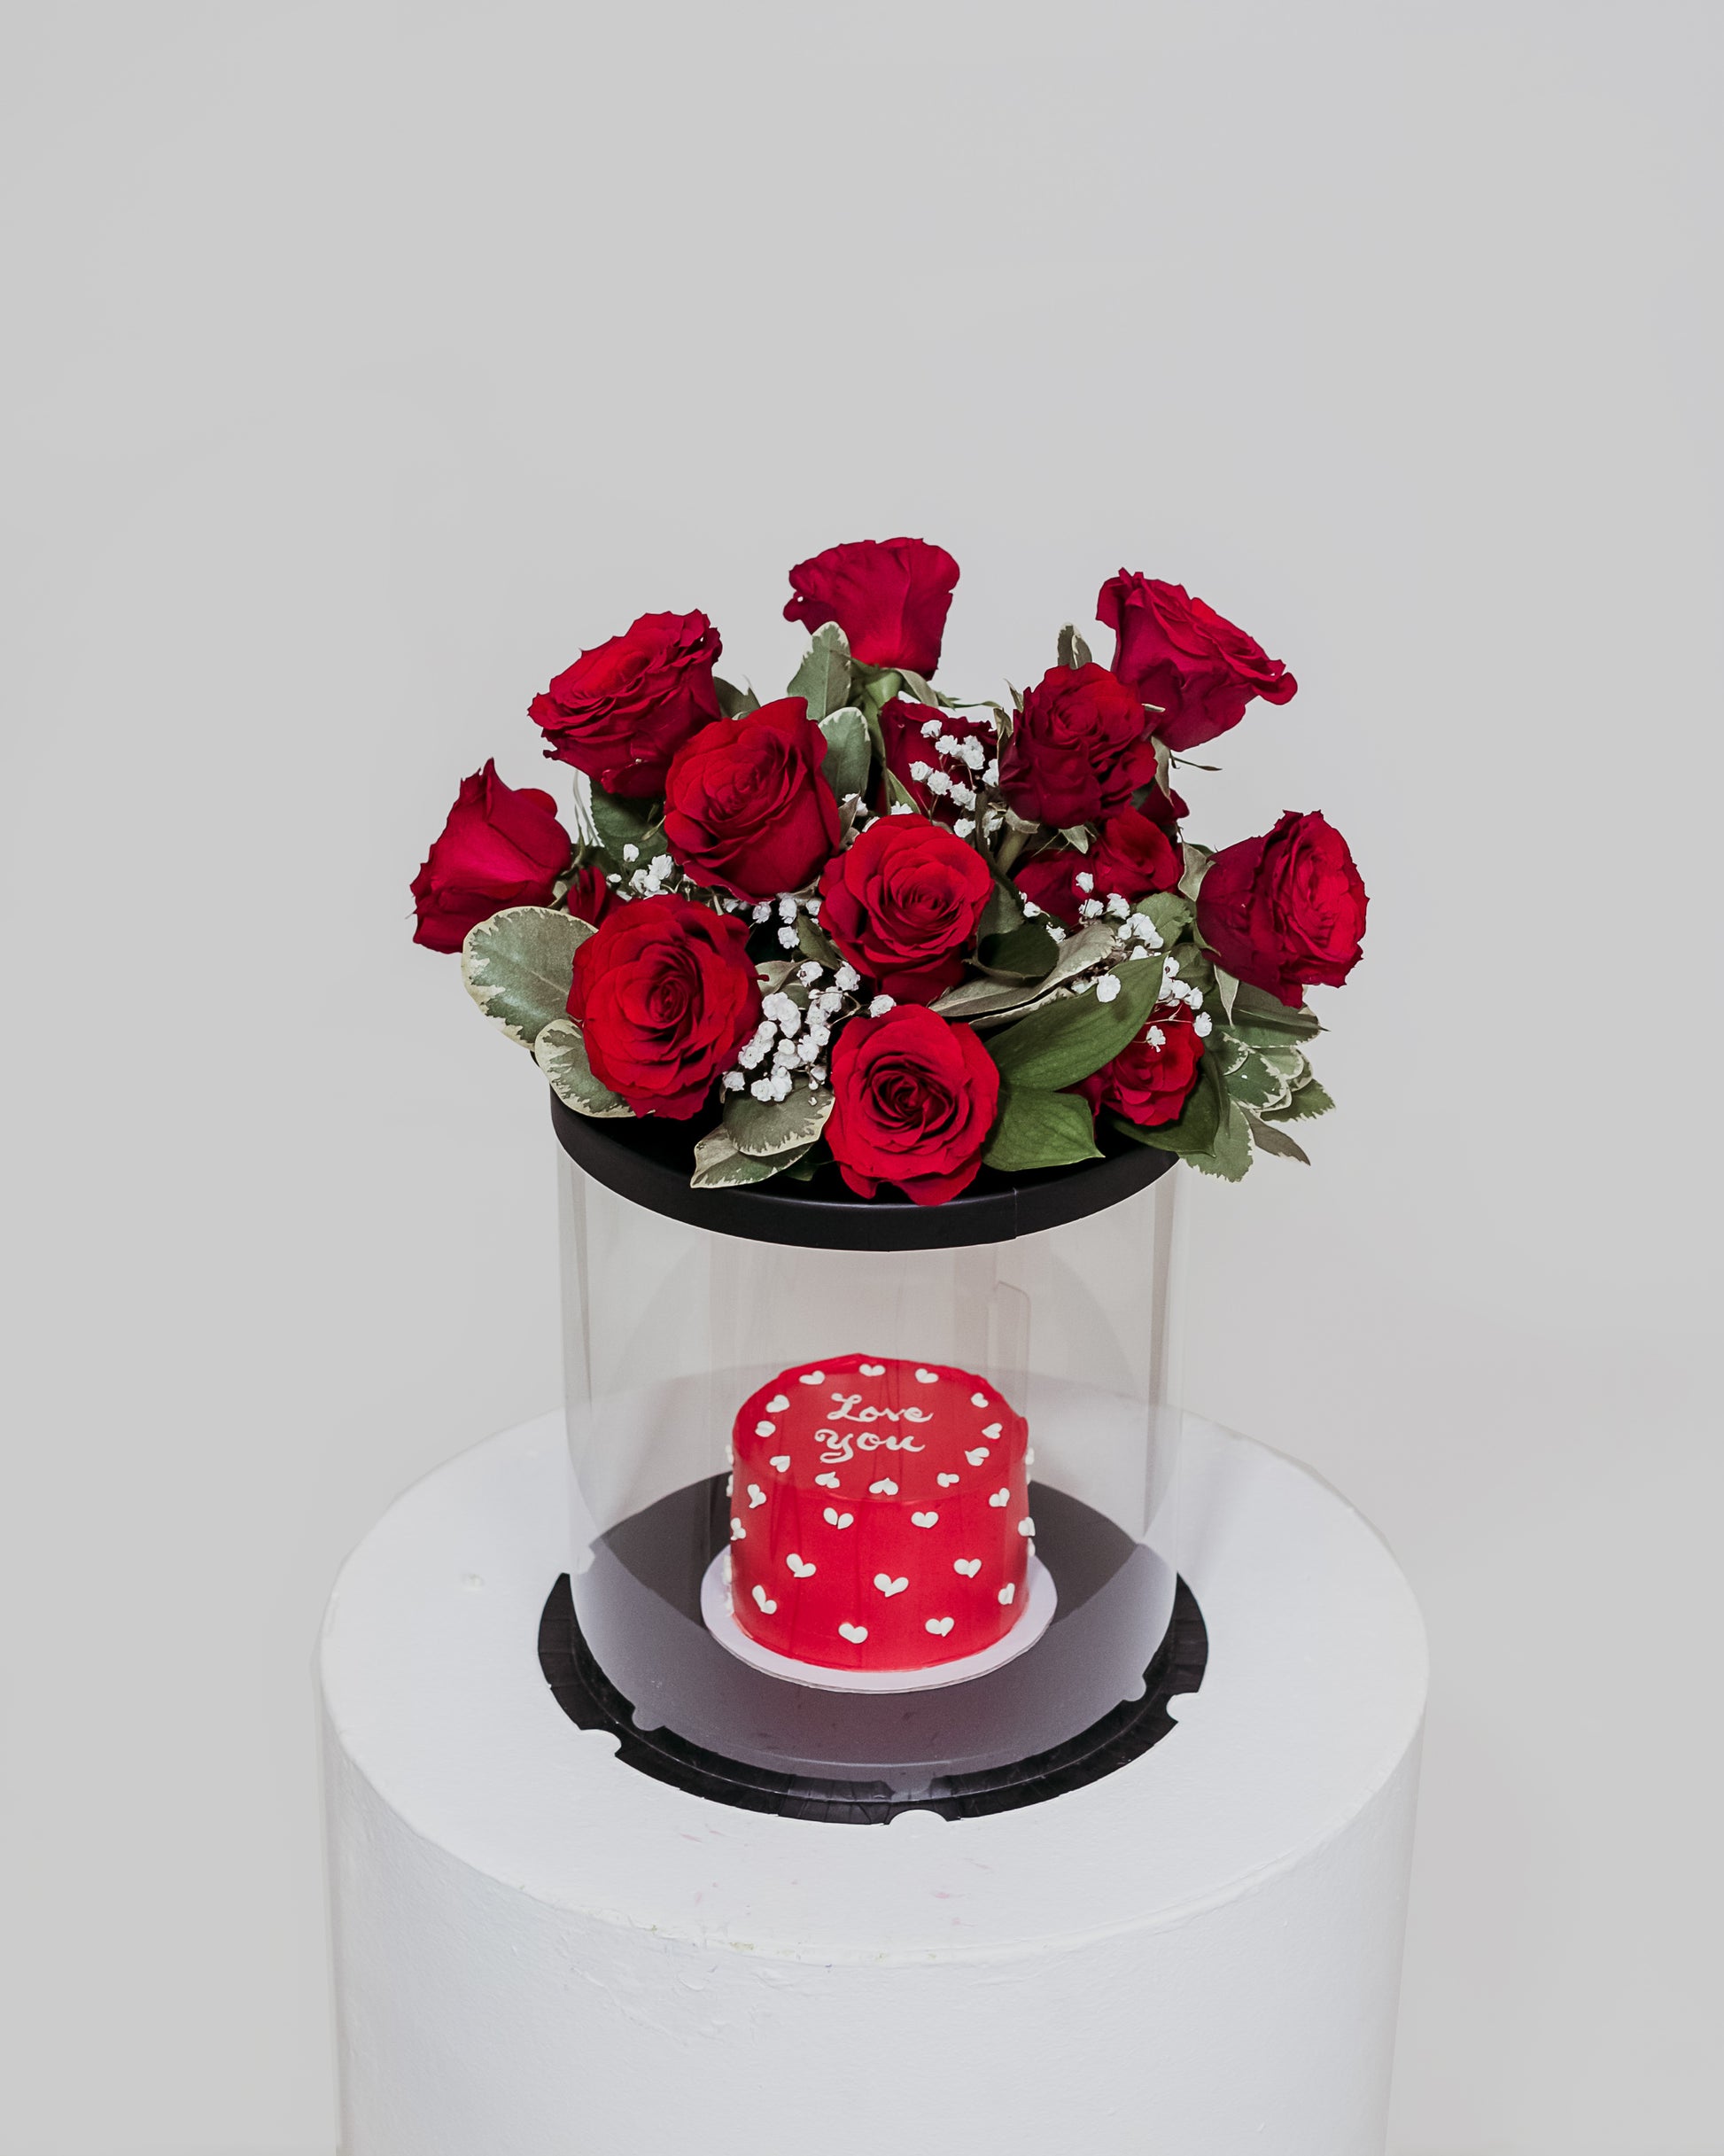 A delectable red Valentine's cake presented in a box, accompanied by a beautiful arrangement of flowers, a sweet and romantic gift for Valentine's Day.